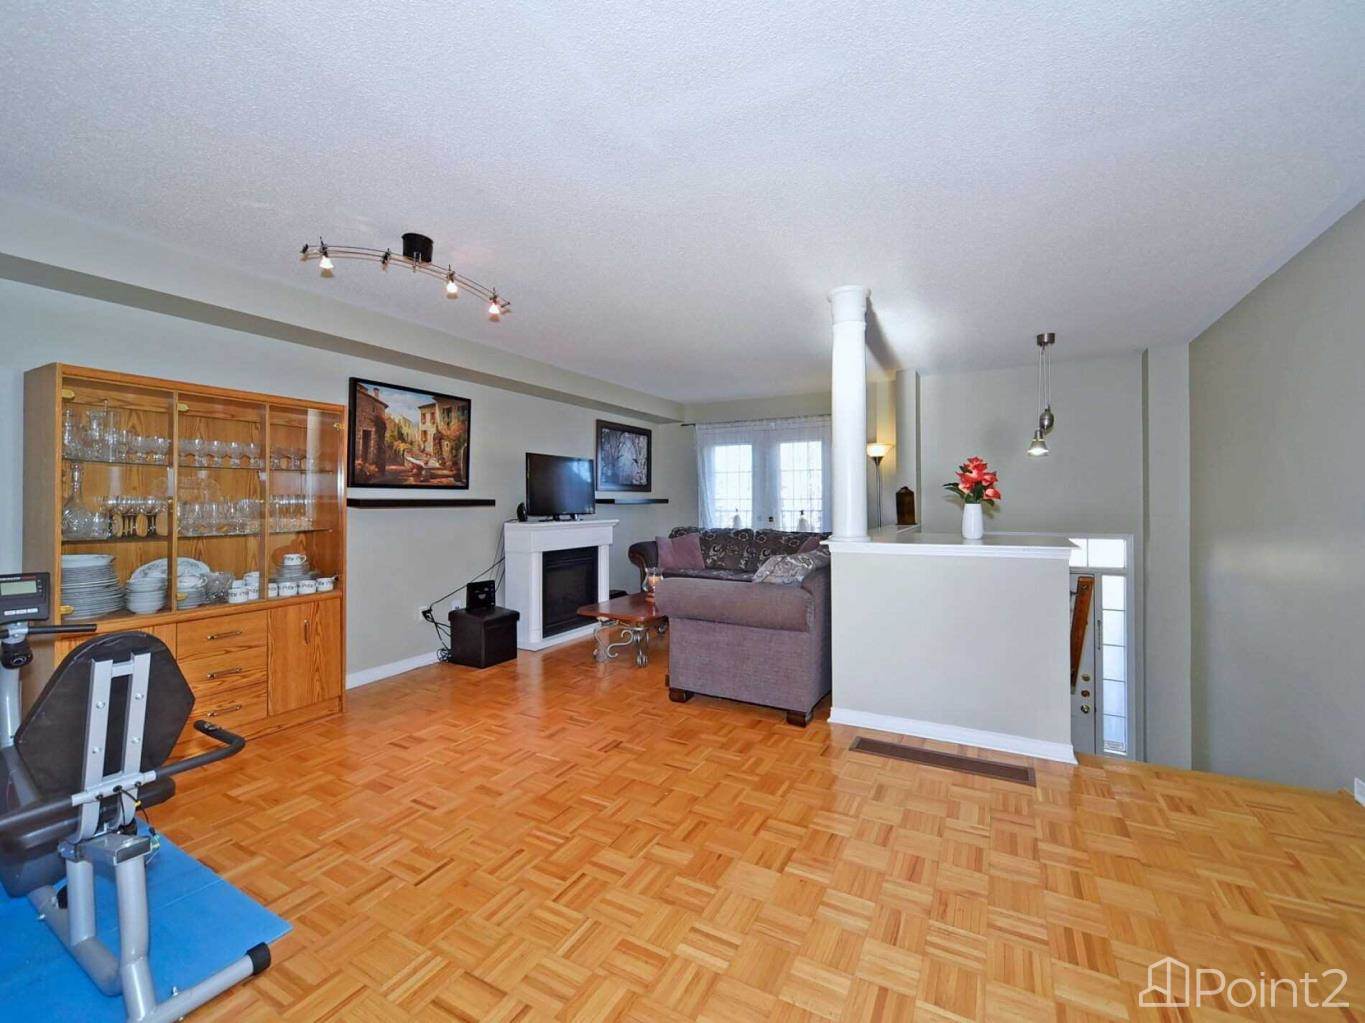 19 Foxchase Ave Vaughan Ontario L 4 L 9 N 1, Vaughan, ON L4L9N1 Photo 5